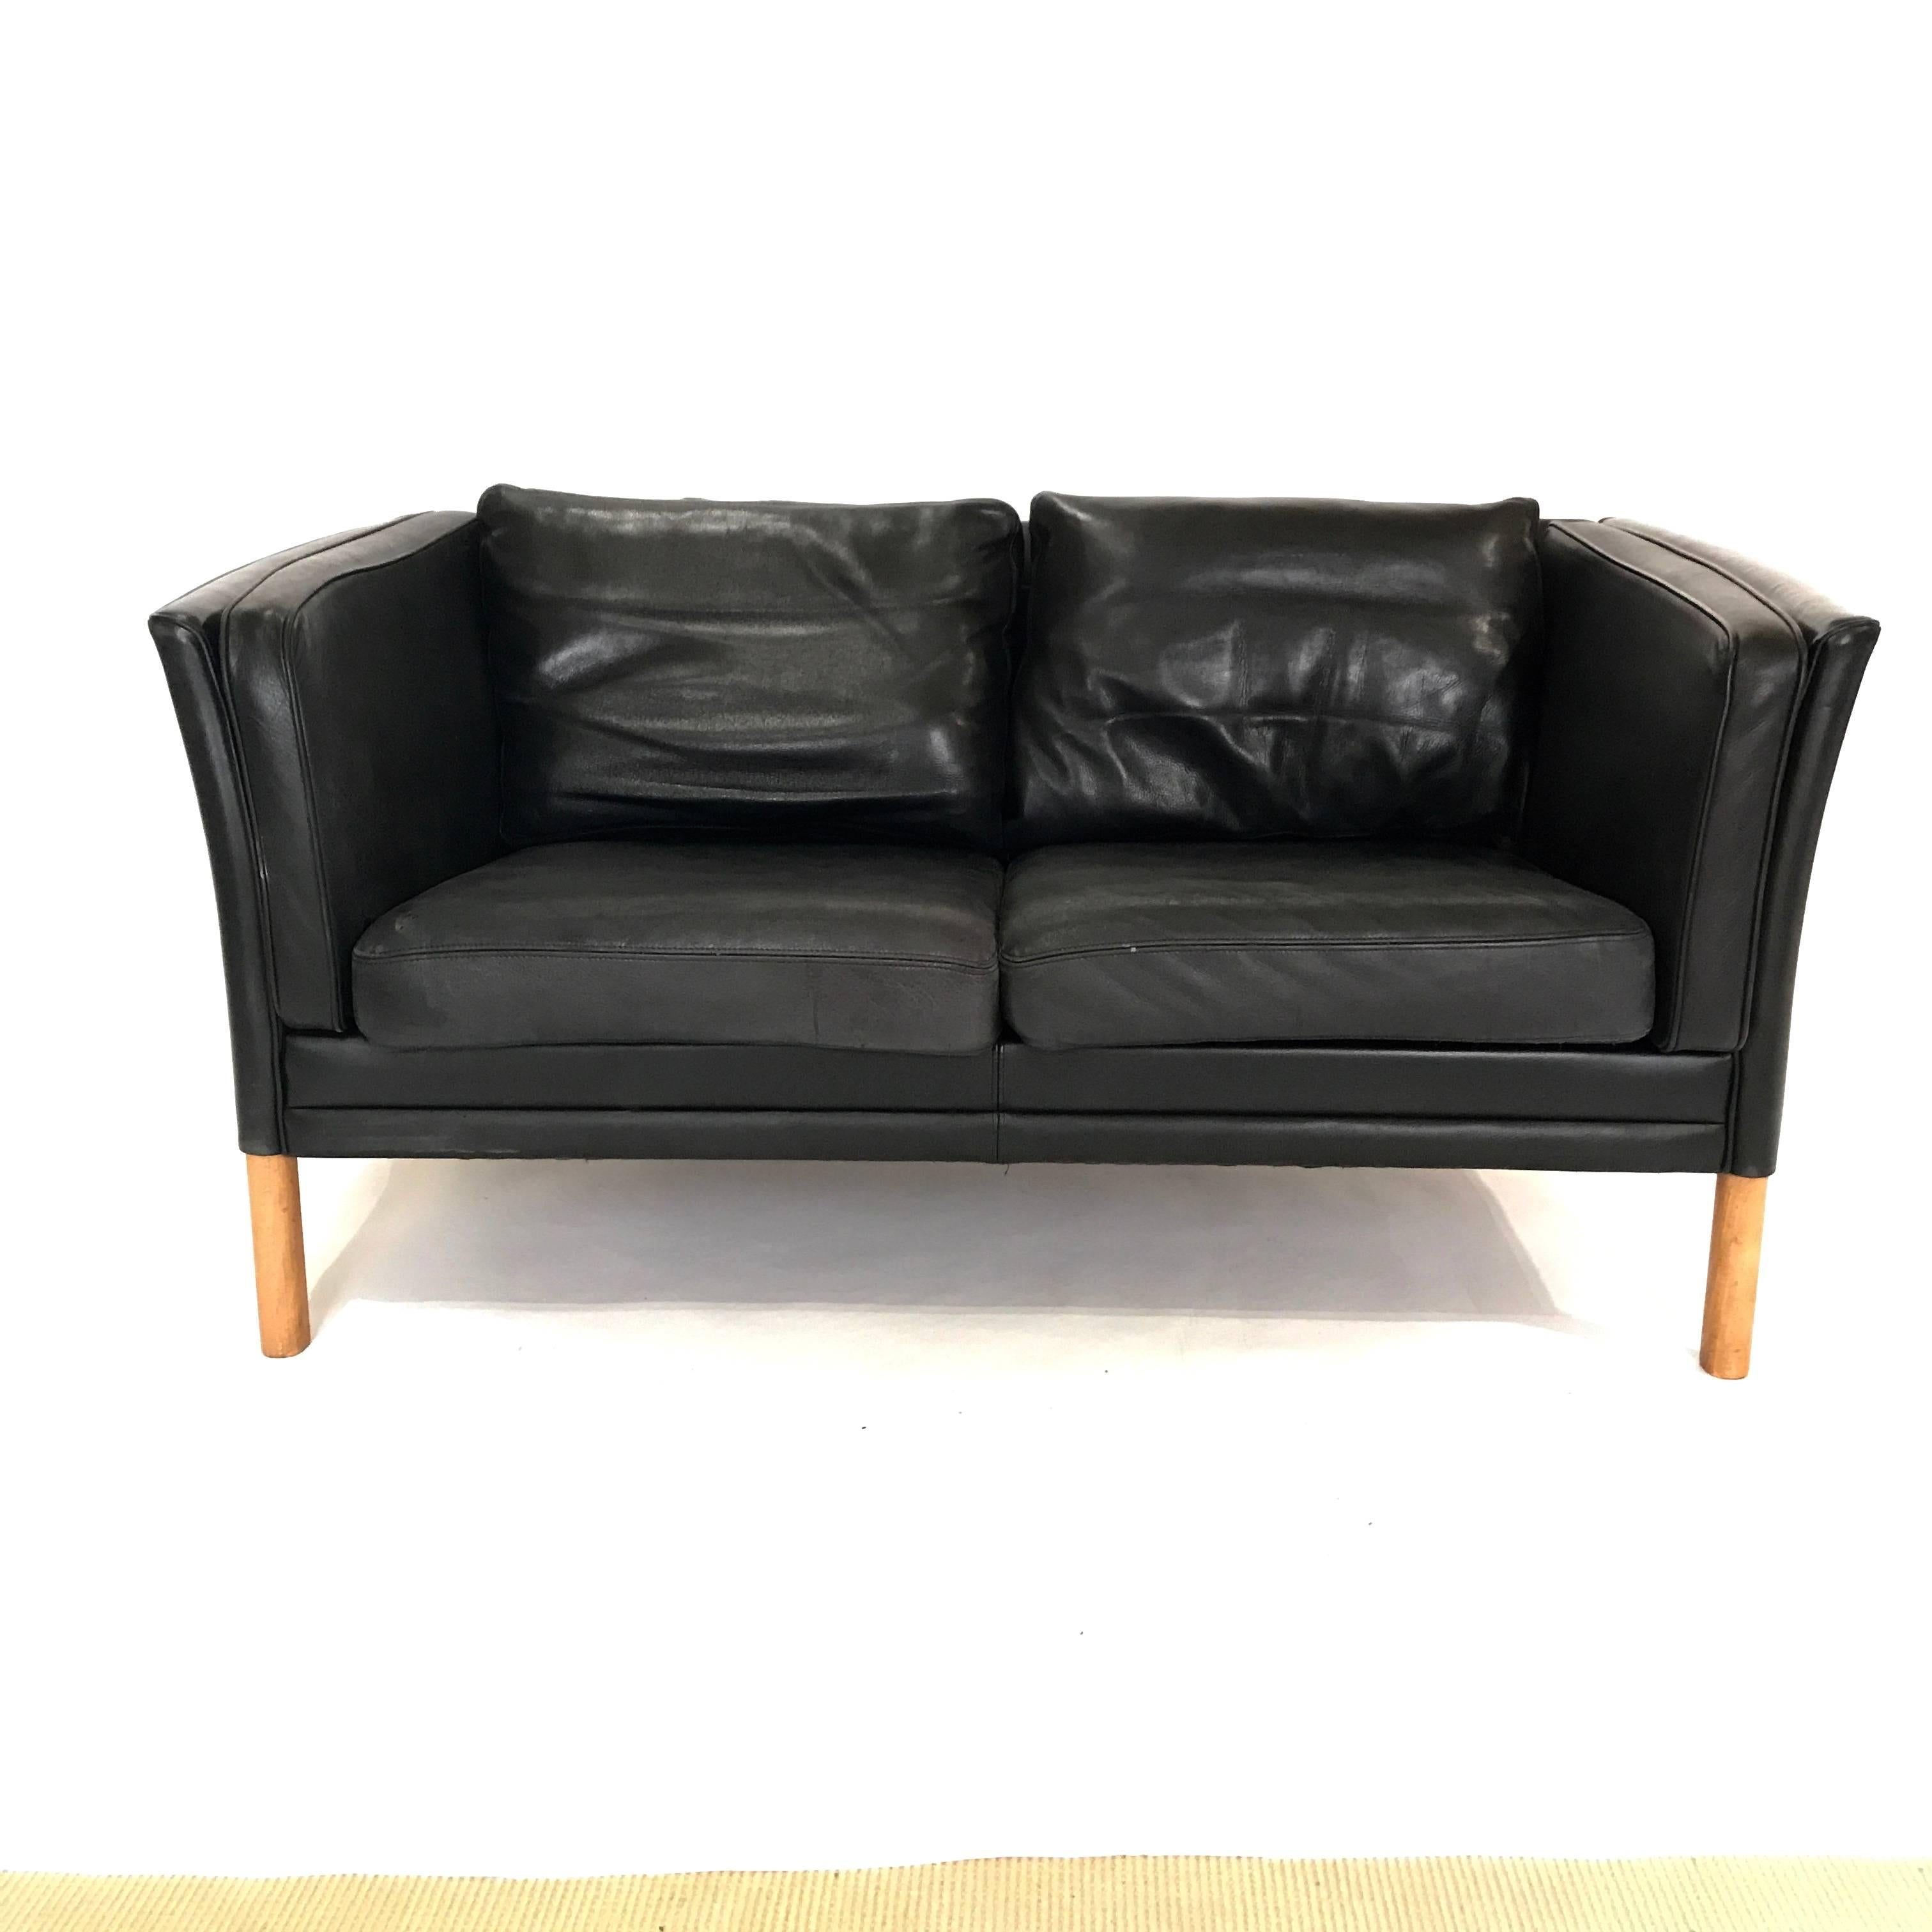 Two-seat black leather sofa from Denmark in the manner of Børge Mogensen. Beautiful patinated black leather with solid beech wood legs. Stunning Danish design.